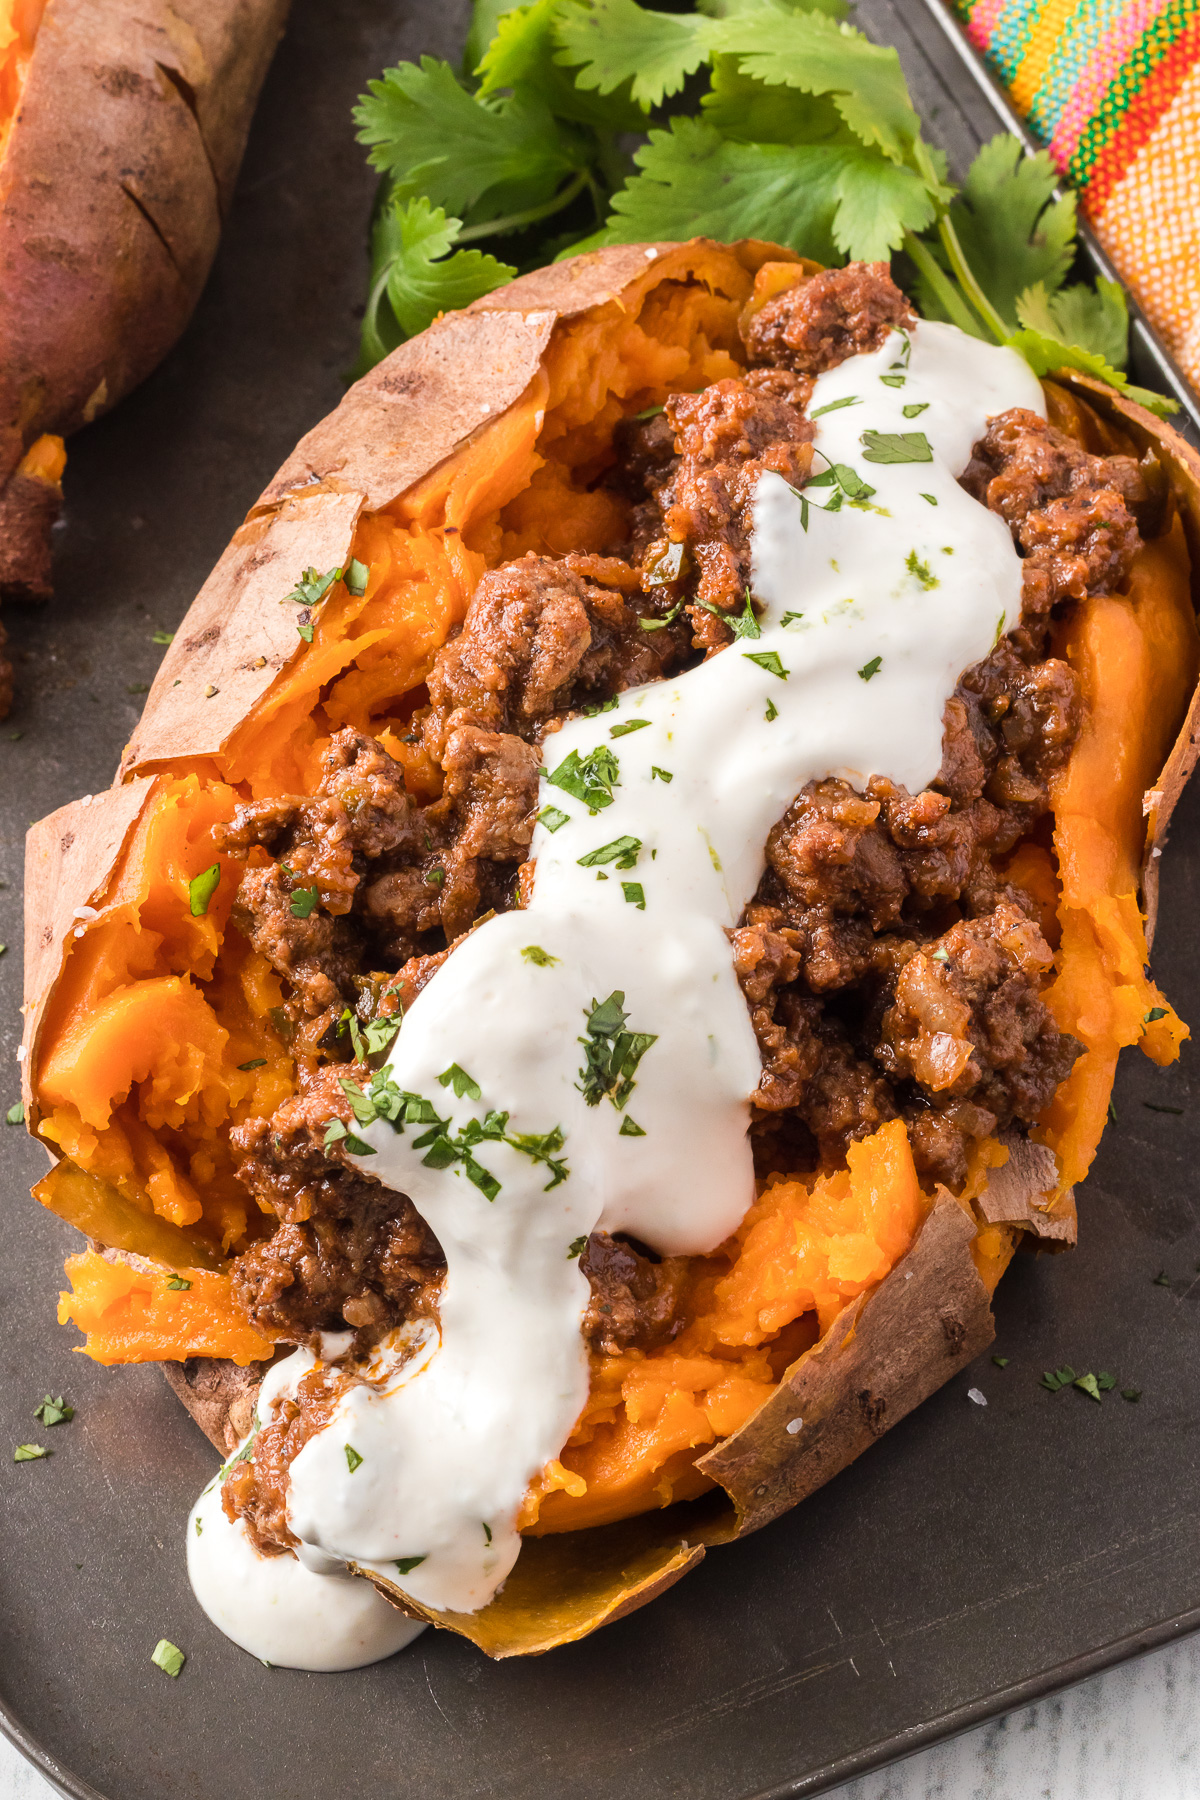 Our Mexican Sloppy Joe Sweet Potatoes are made with ground beef, homemade taco seasoning, and your favorite ingredients for a delicious twist on an old favorite. Sweet potatoes provide a perfect “shell” for these filling, flavorful tacos. So skip the take-out and try something new for dinner tonight! via @foodhussy